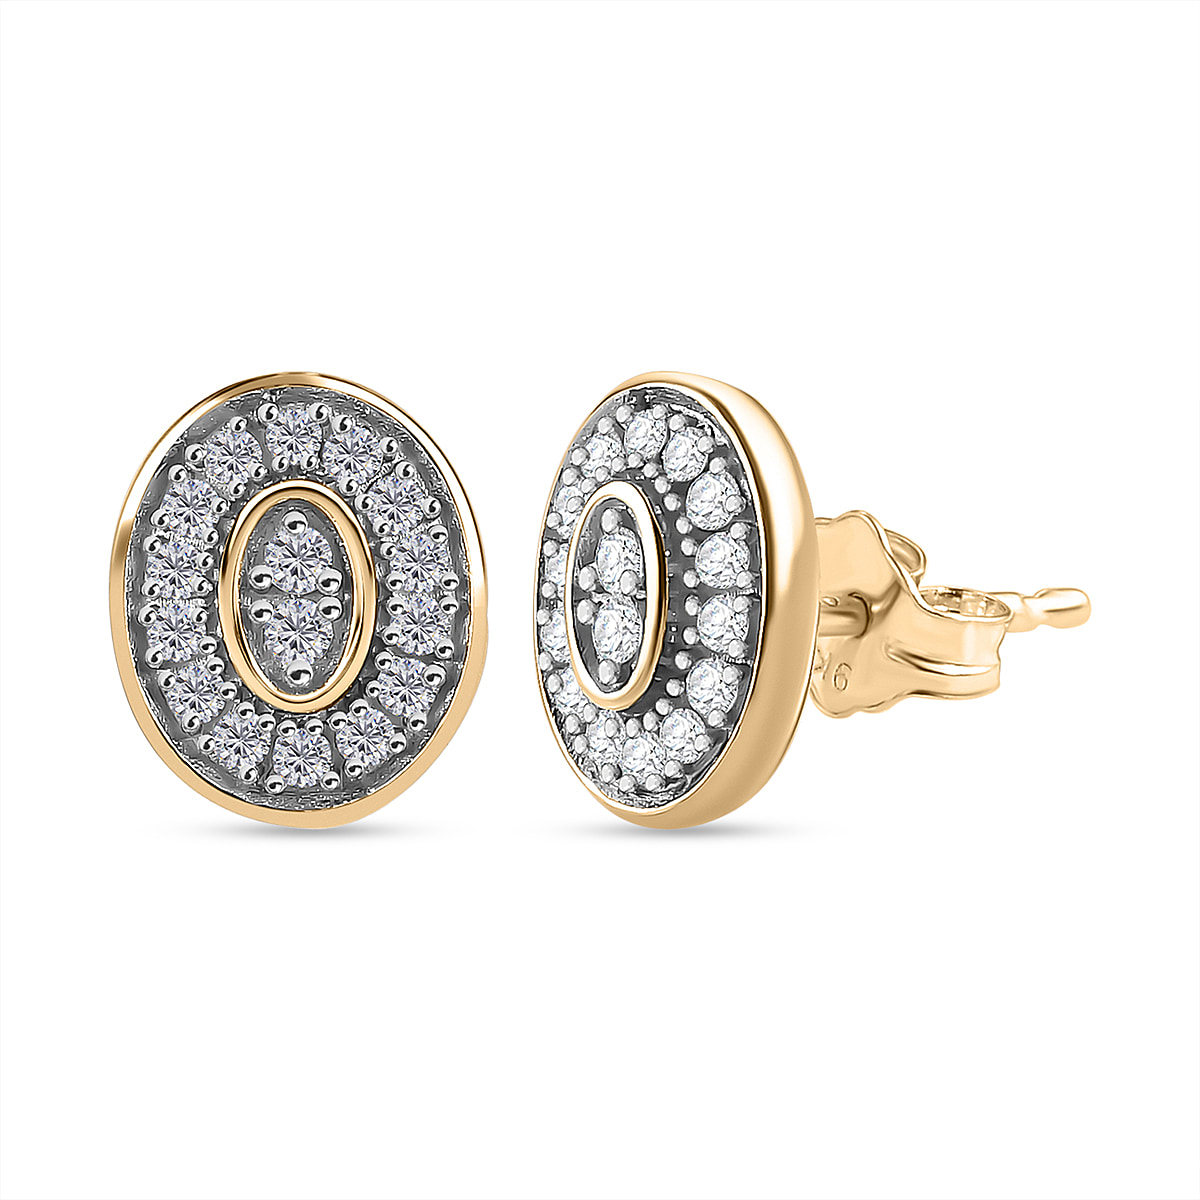 9K Yellow Gold  I3   White Diamond  I3 Solitaire Stud Push Post Earring 0.21 ct,  Gold Wt. 1.37 Gms  0.208  Ct.